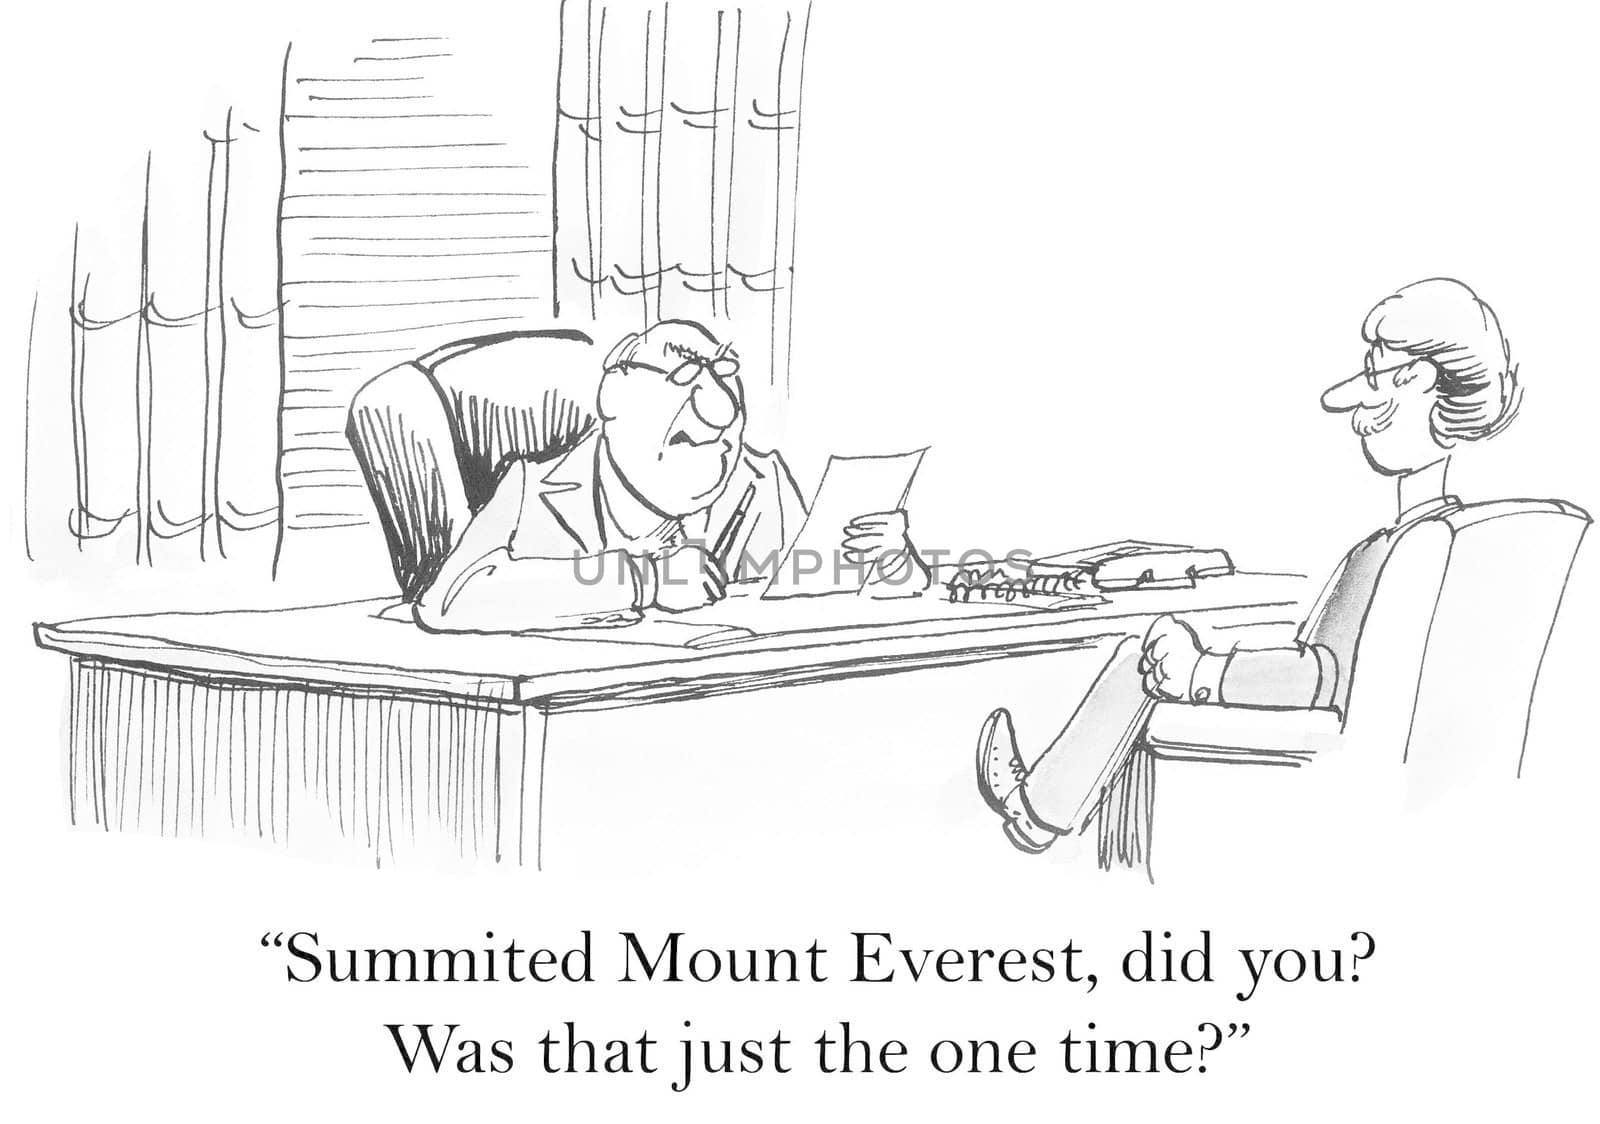 "Summited Mount Everest, did you? Was that just the one time?"